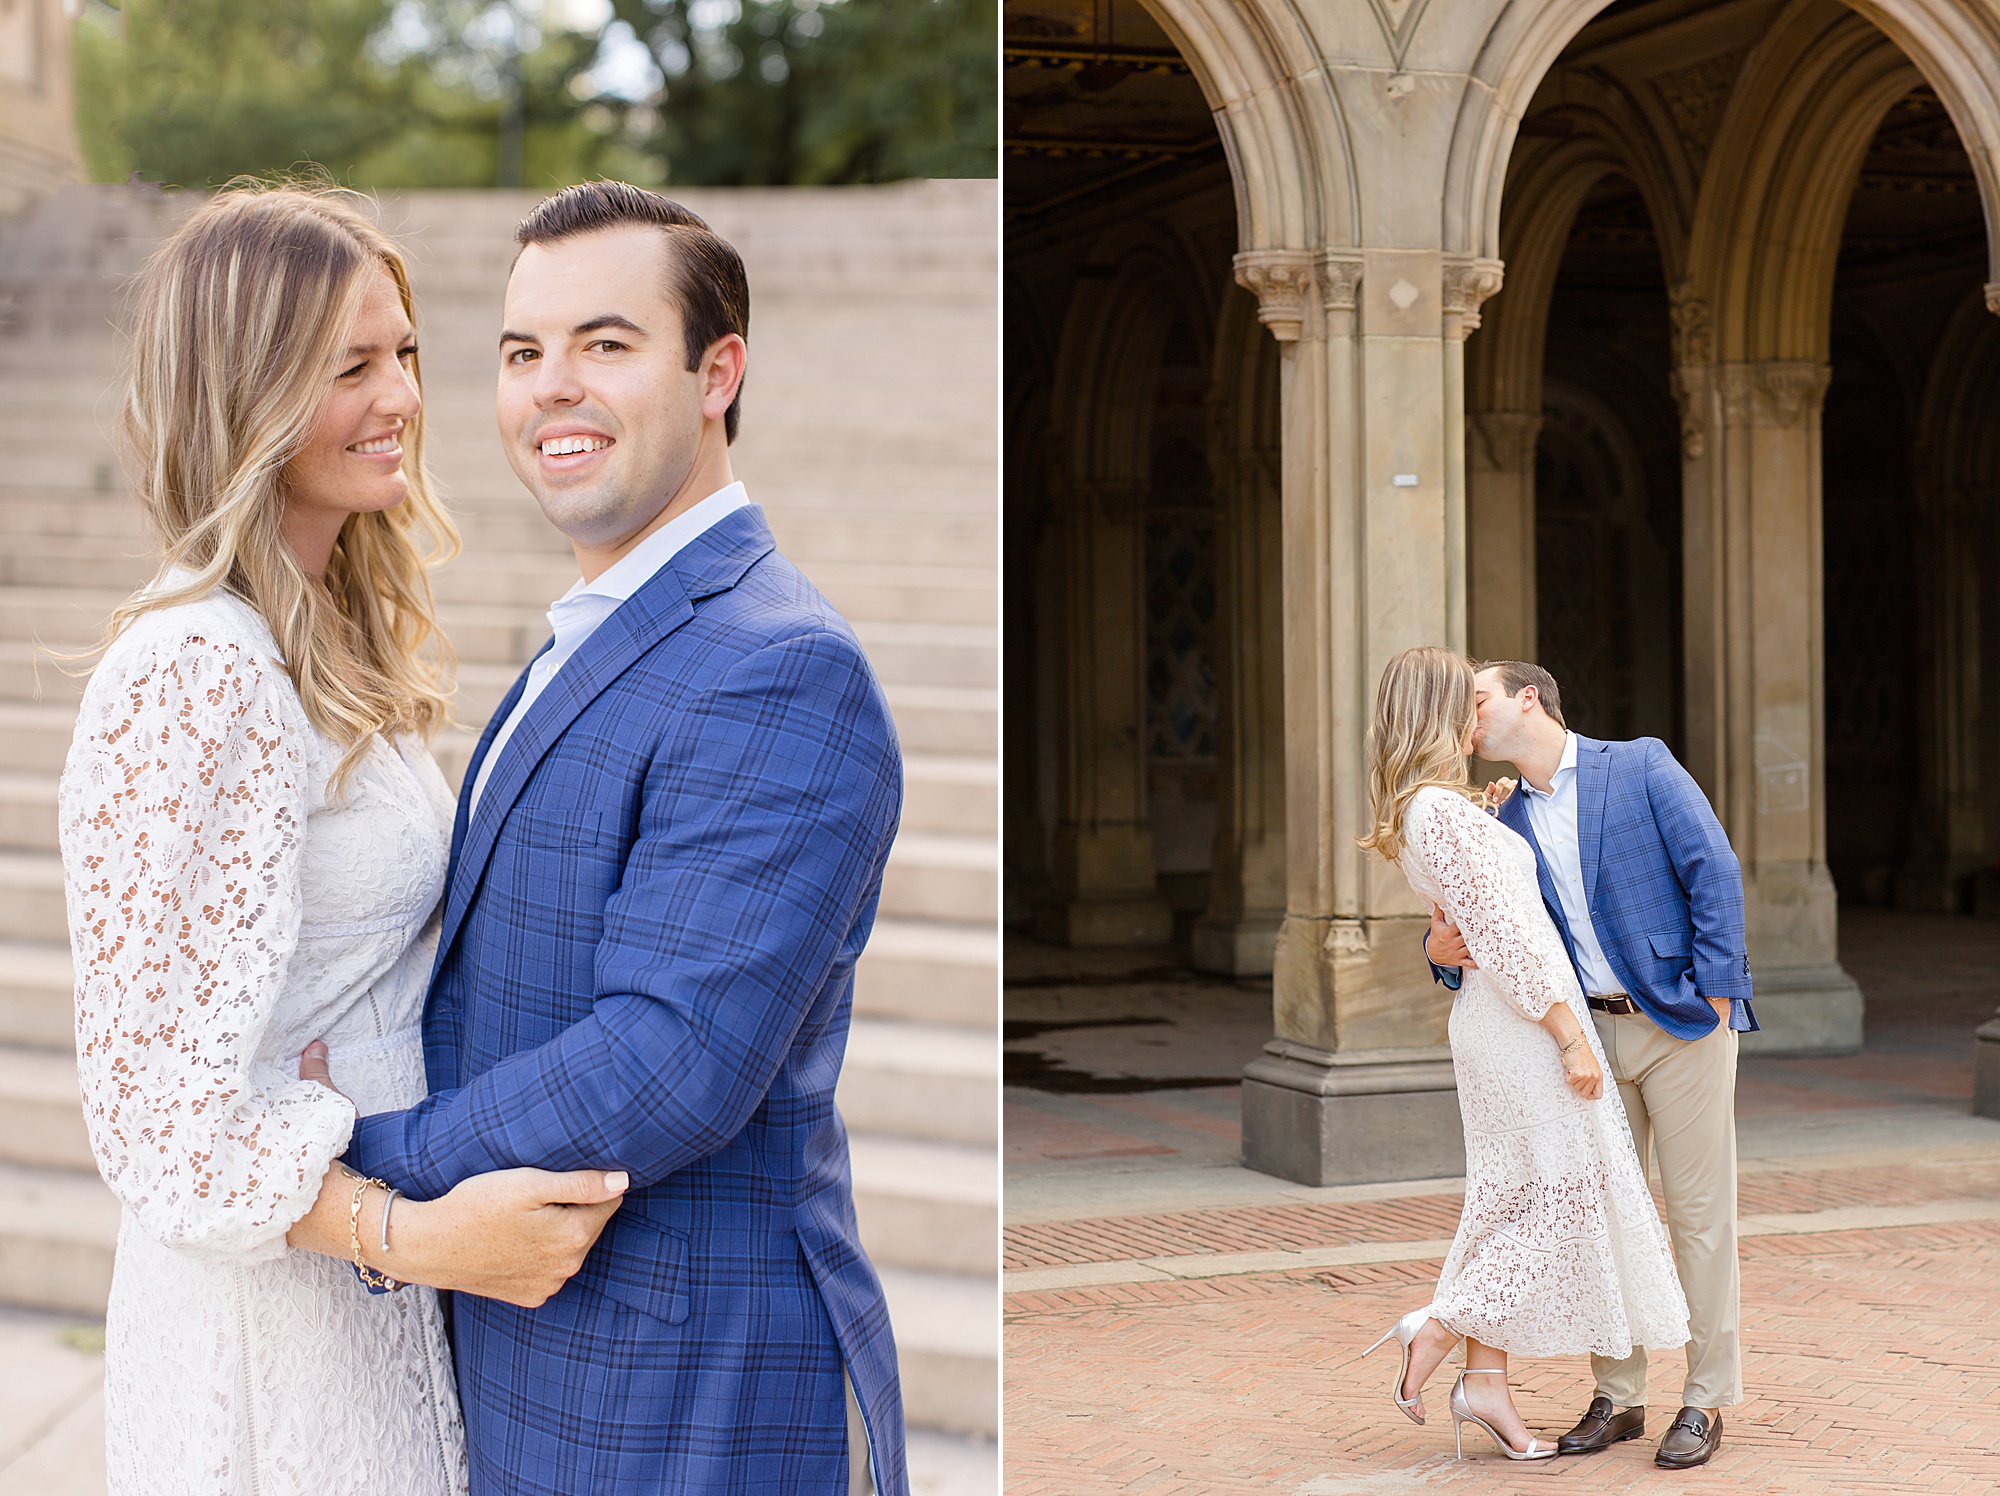 New York City engagement photos in Central Park